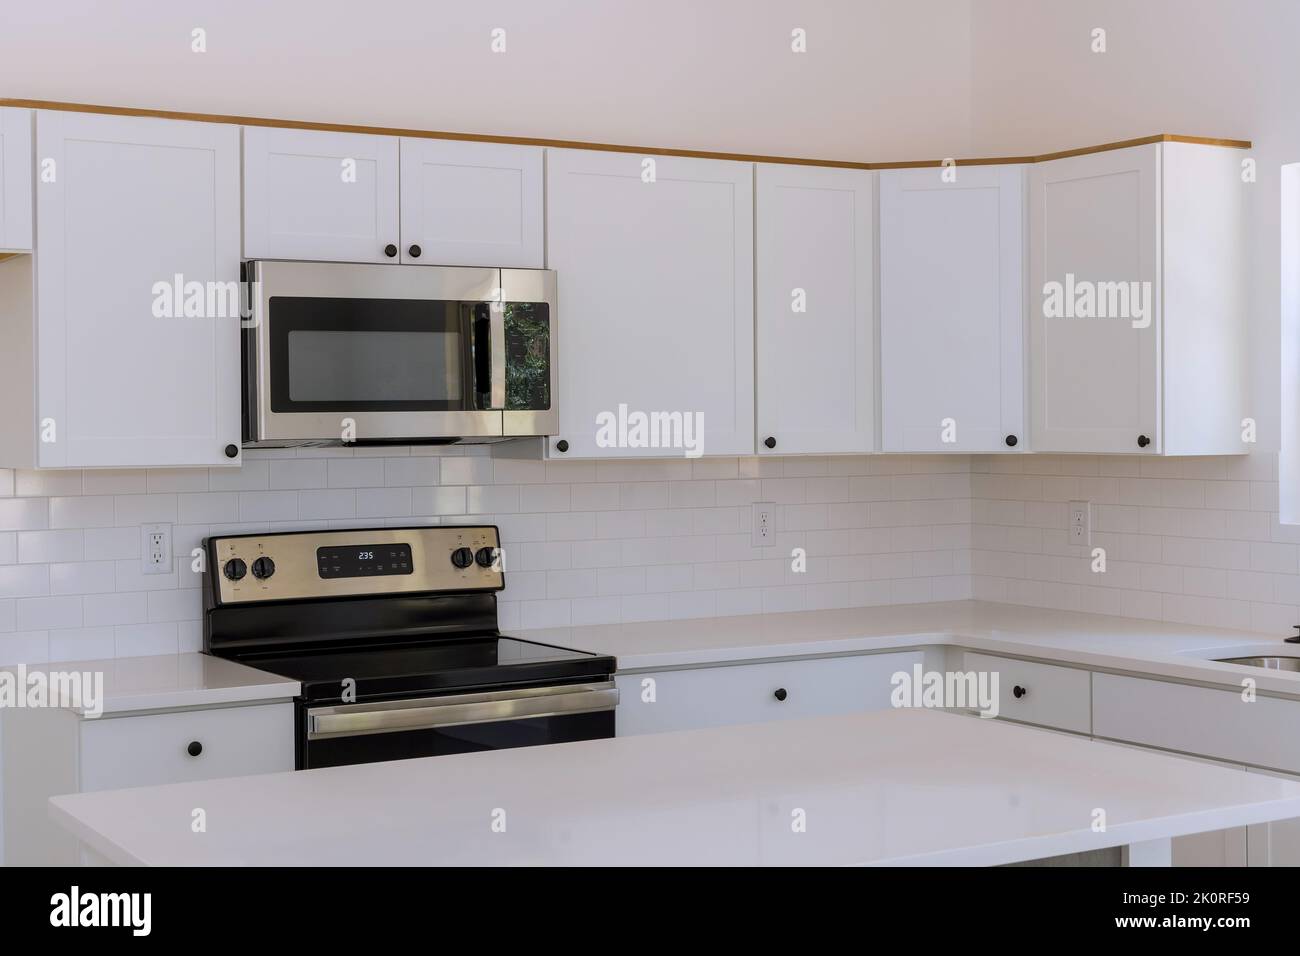 New kitchen appliances and kitchen cabinets are being installed in a newly constructed house Stock Photo